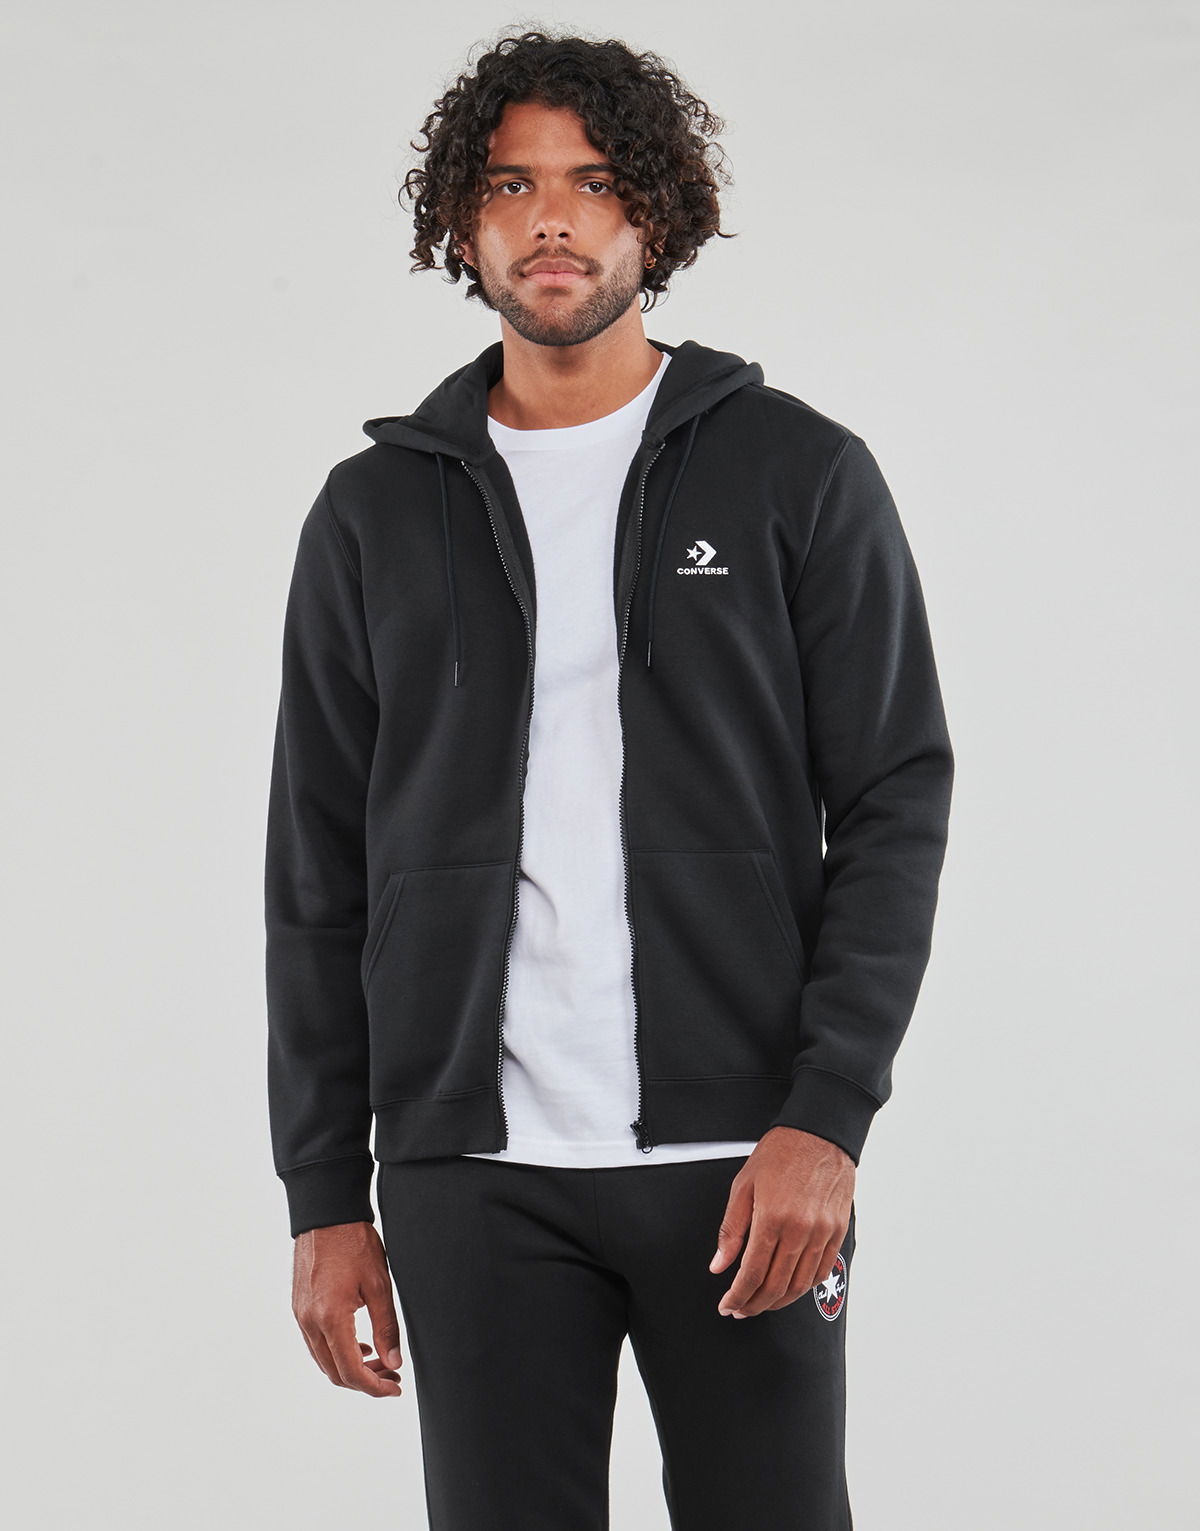 GO-TO EMBROIDERED STAR CHEVRON FULL-ZIP HOODIE